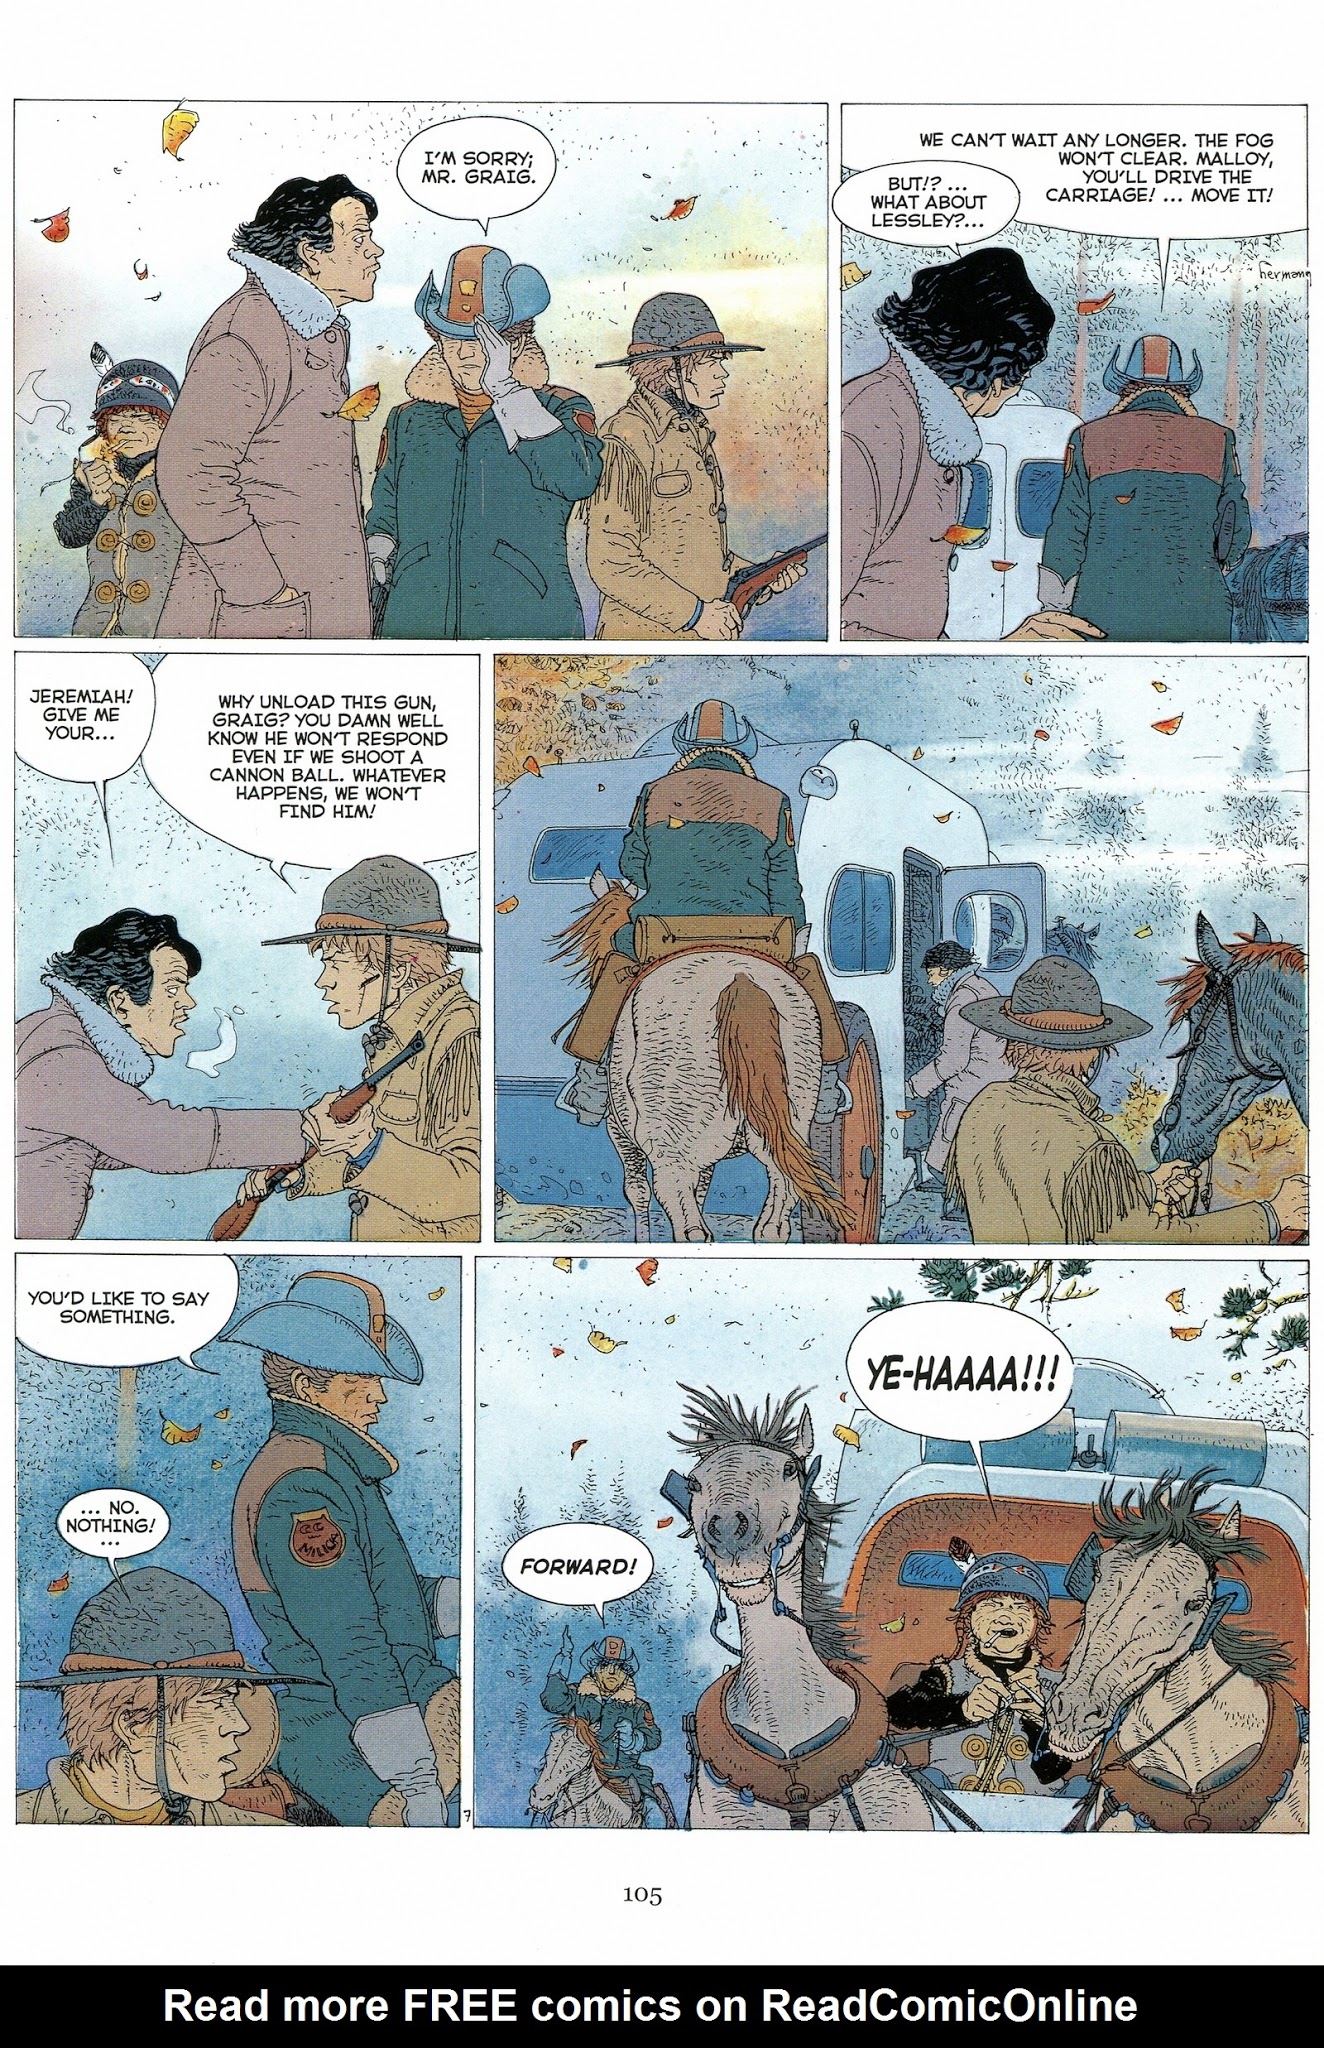 Read online Jeremiah by Hermann comic -  Issue # TPB 2 - 106